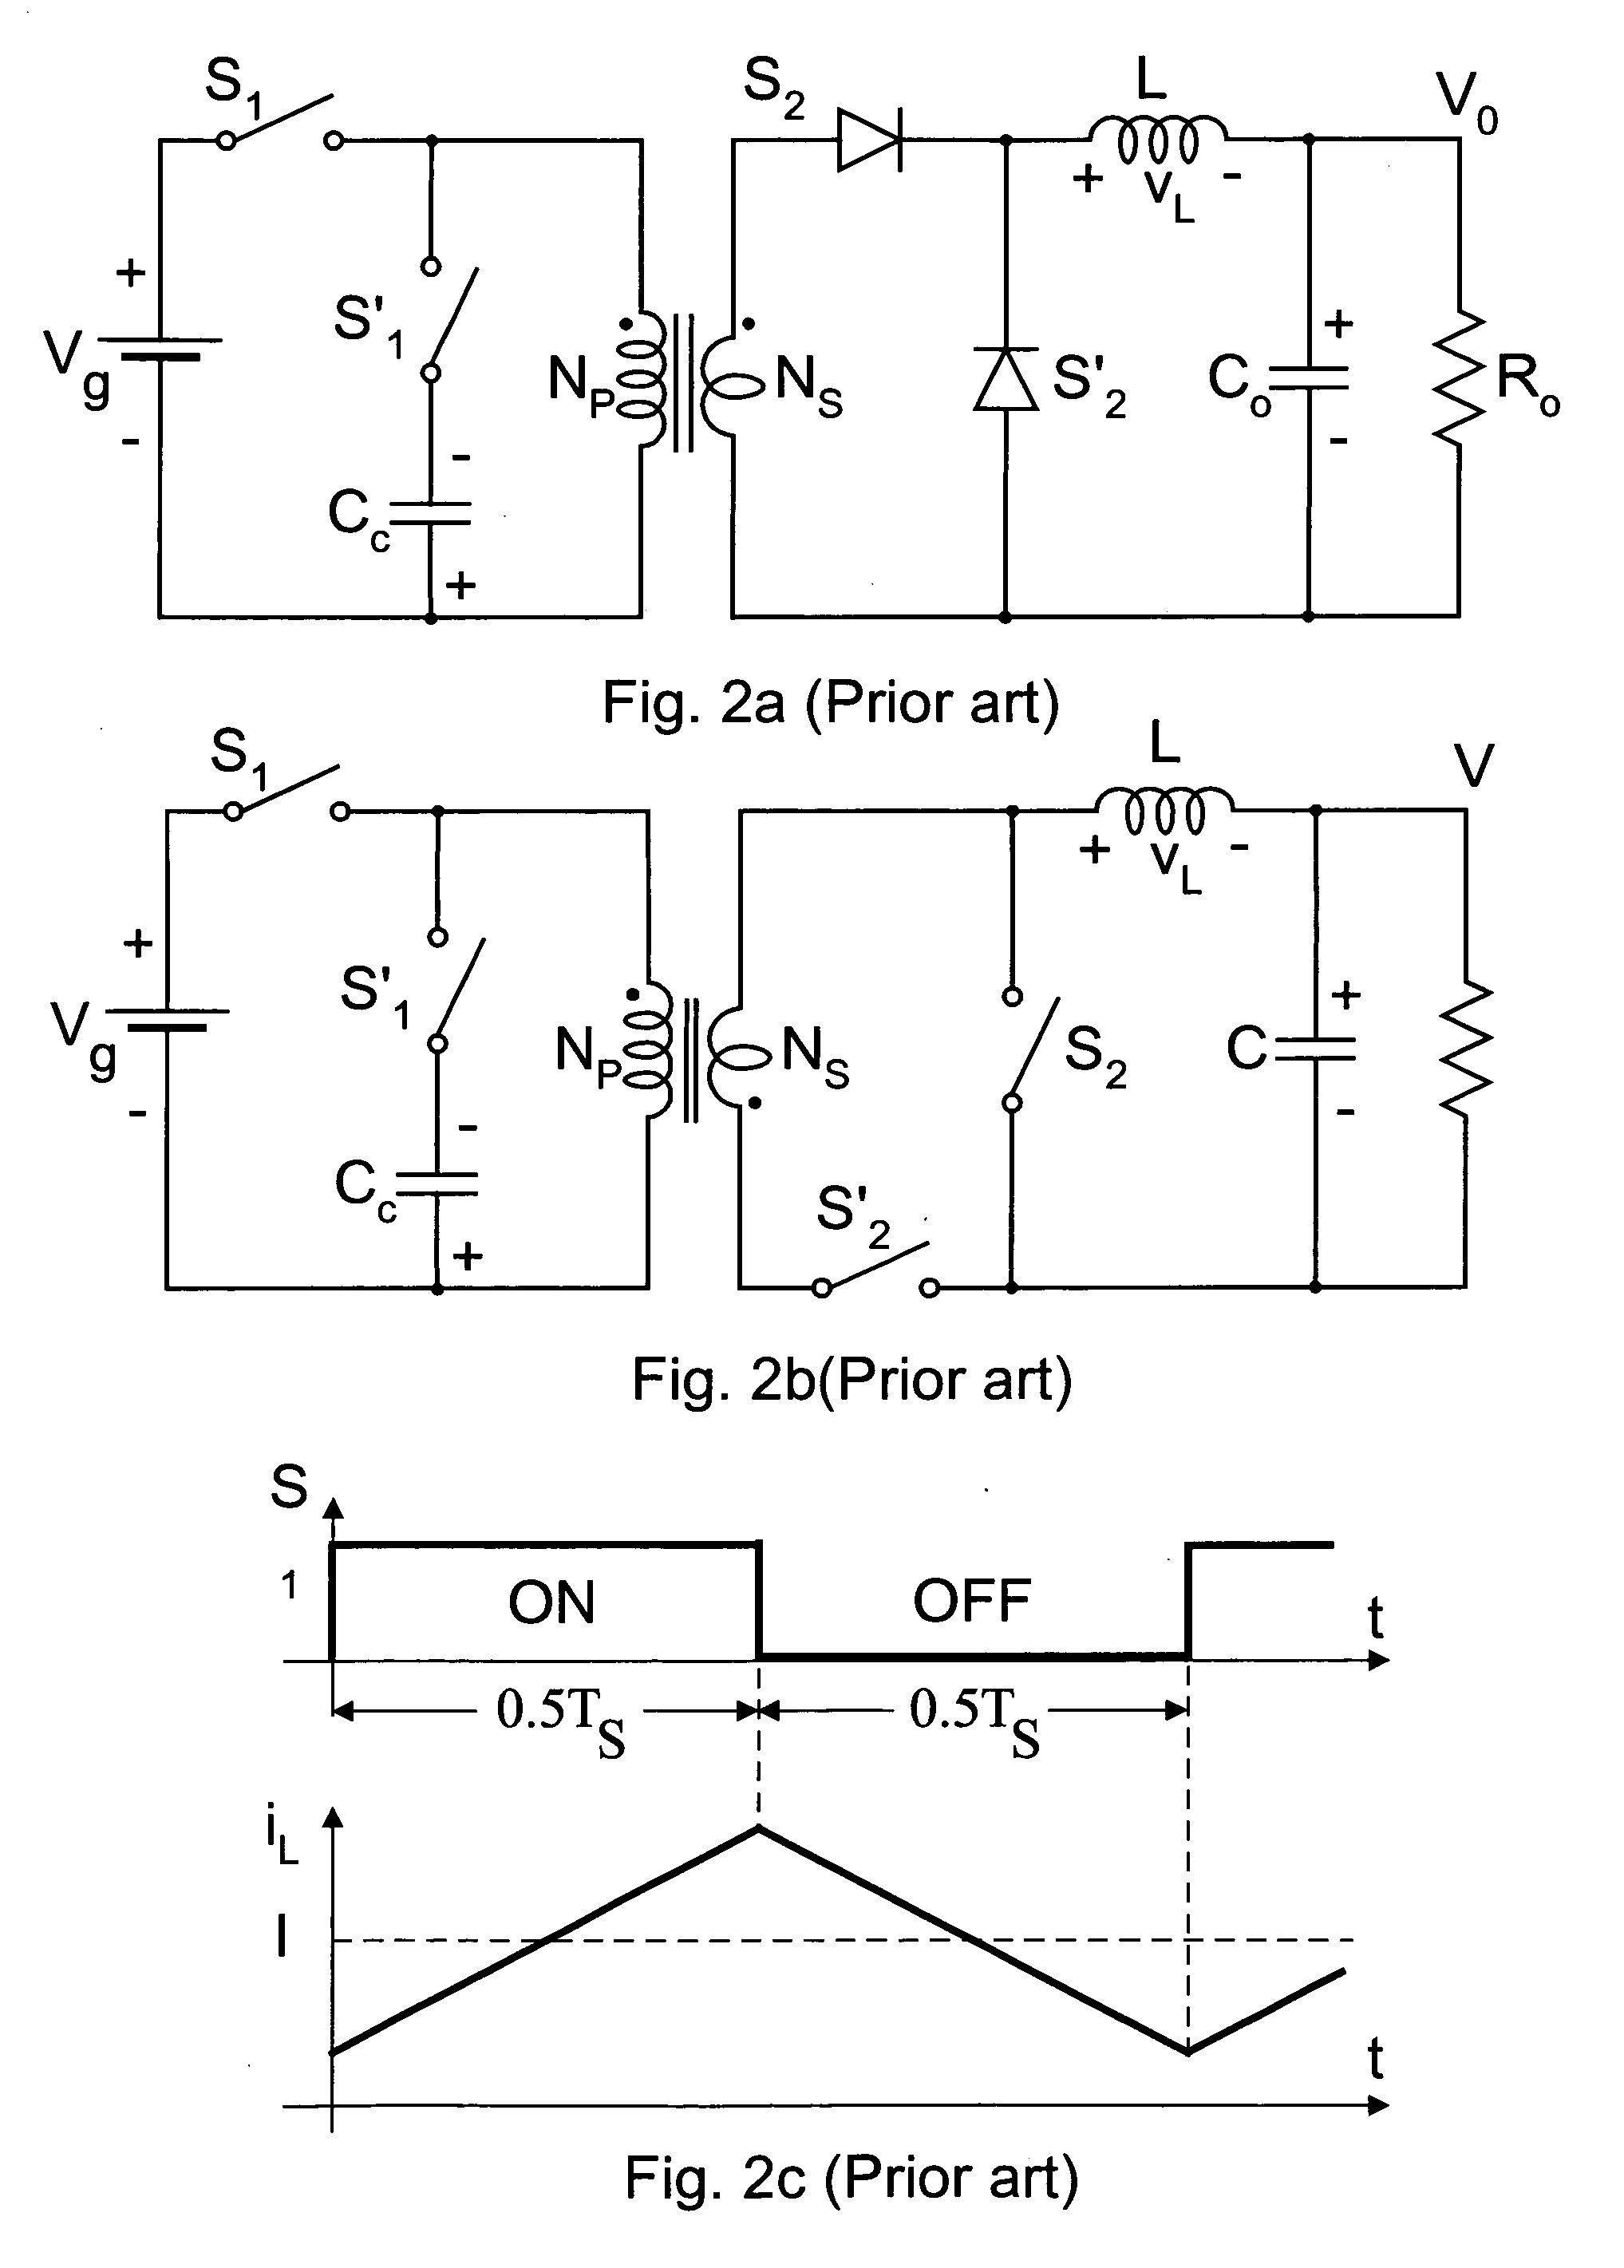 Integrated magnetics switching converter with zero inductor and output ripple currents and lossless switching